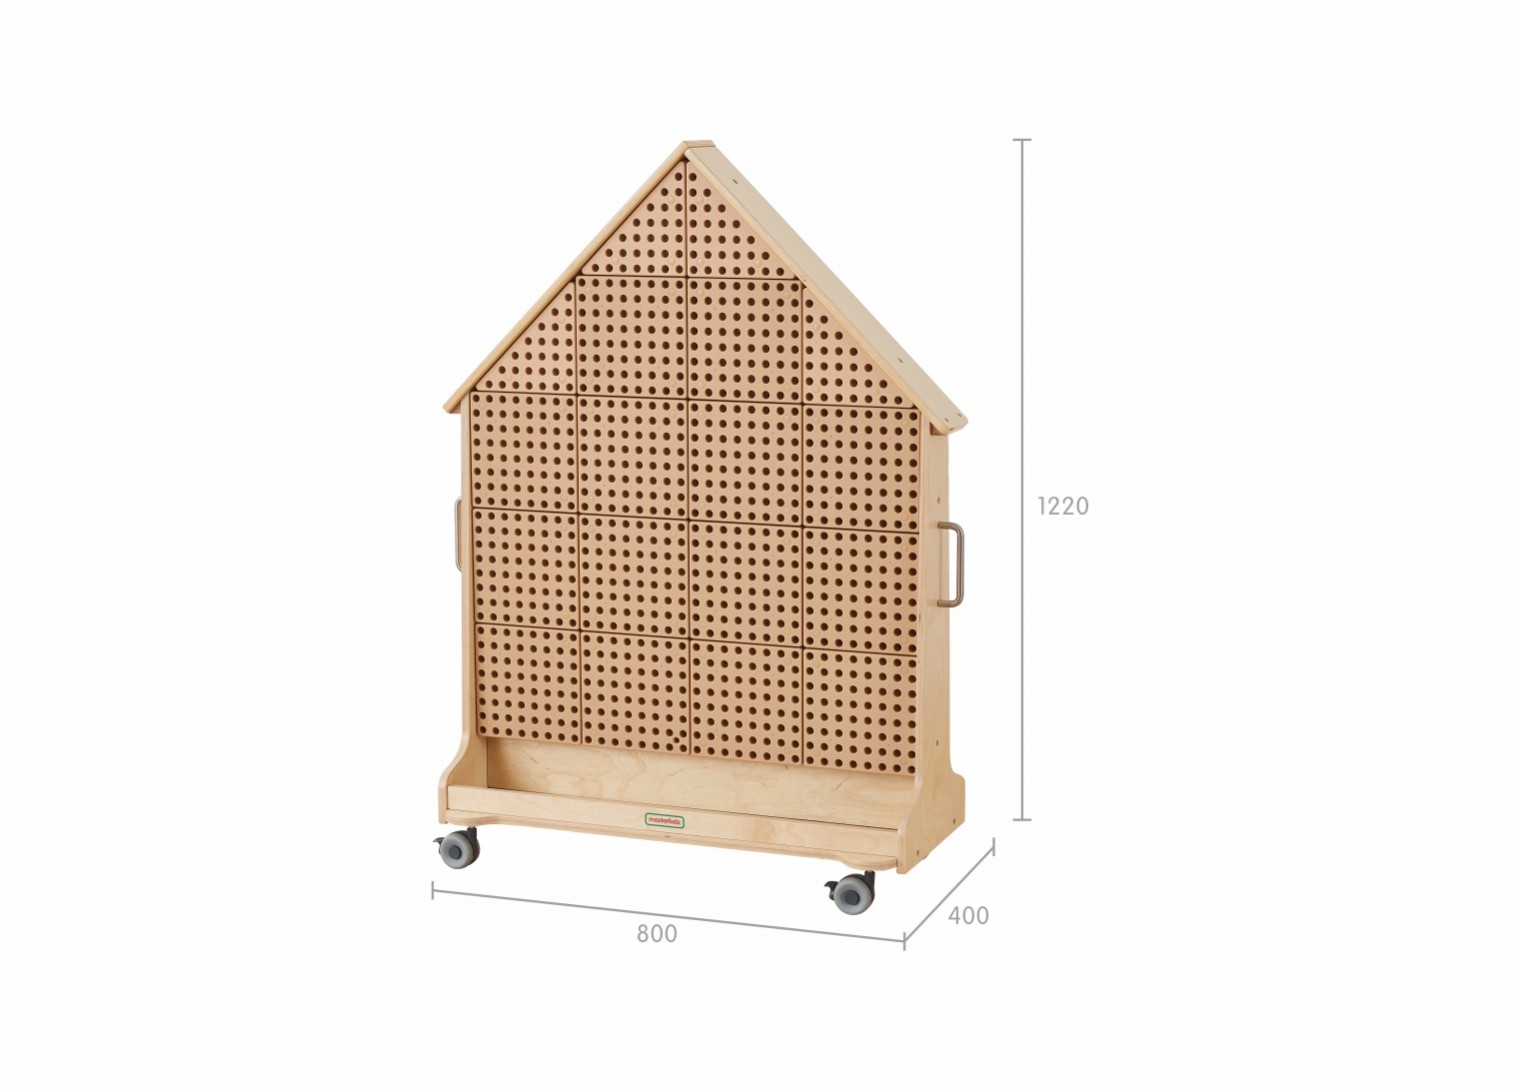 House-shaped Free Standing STEM Wall